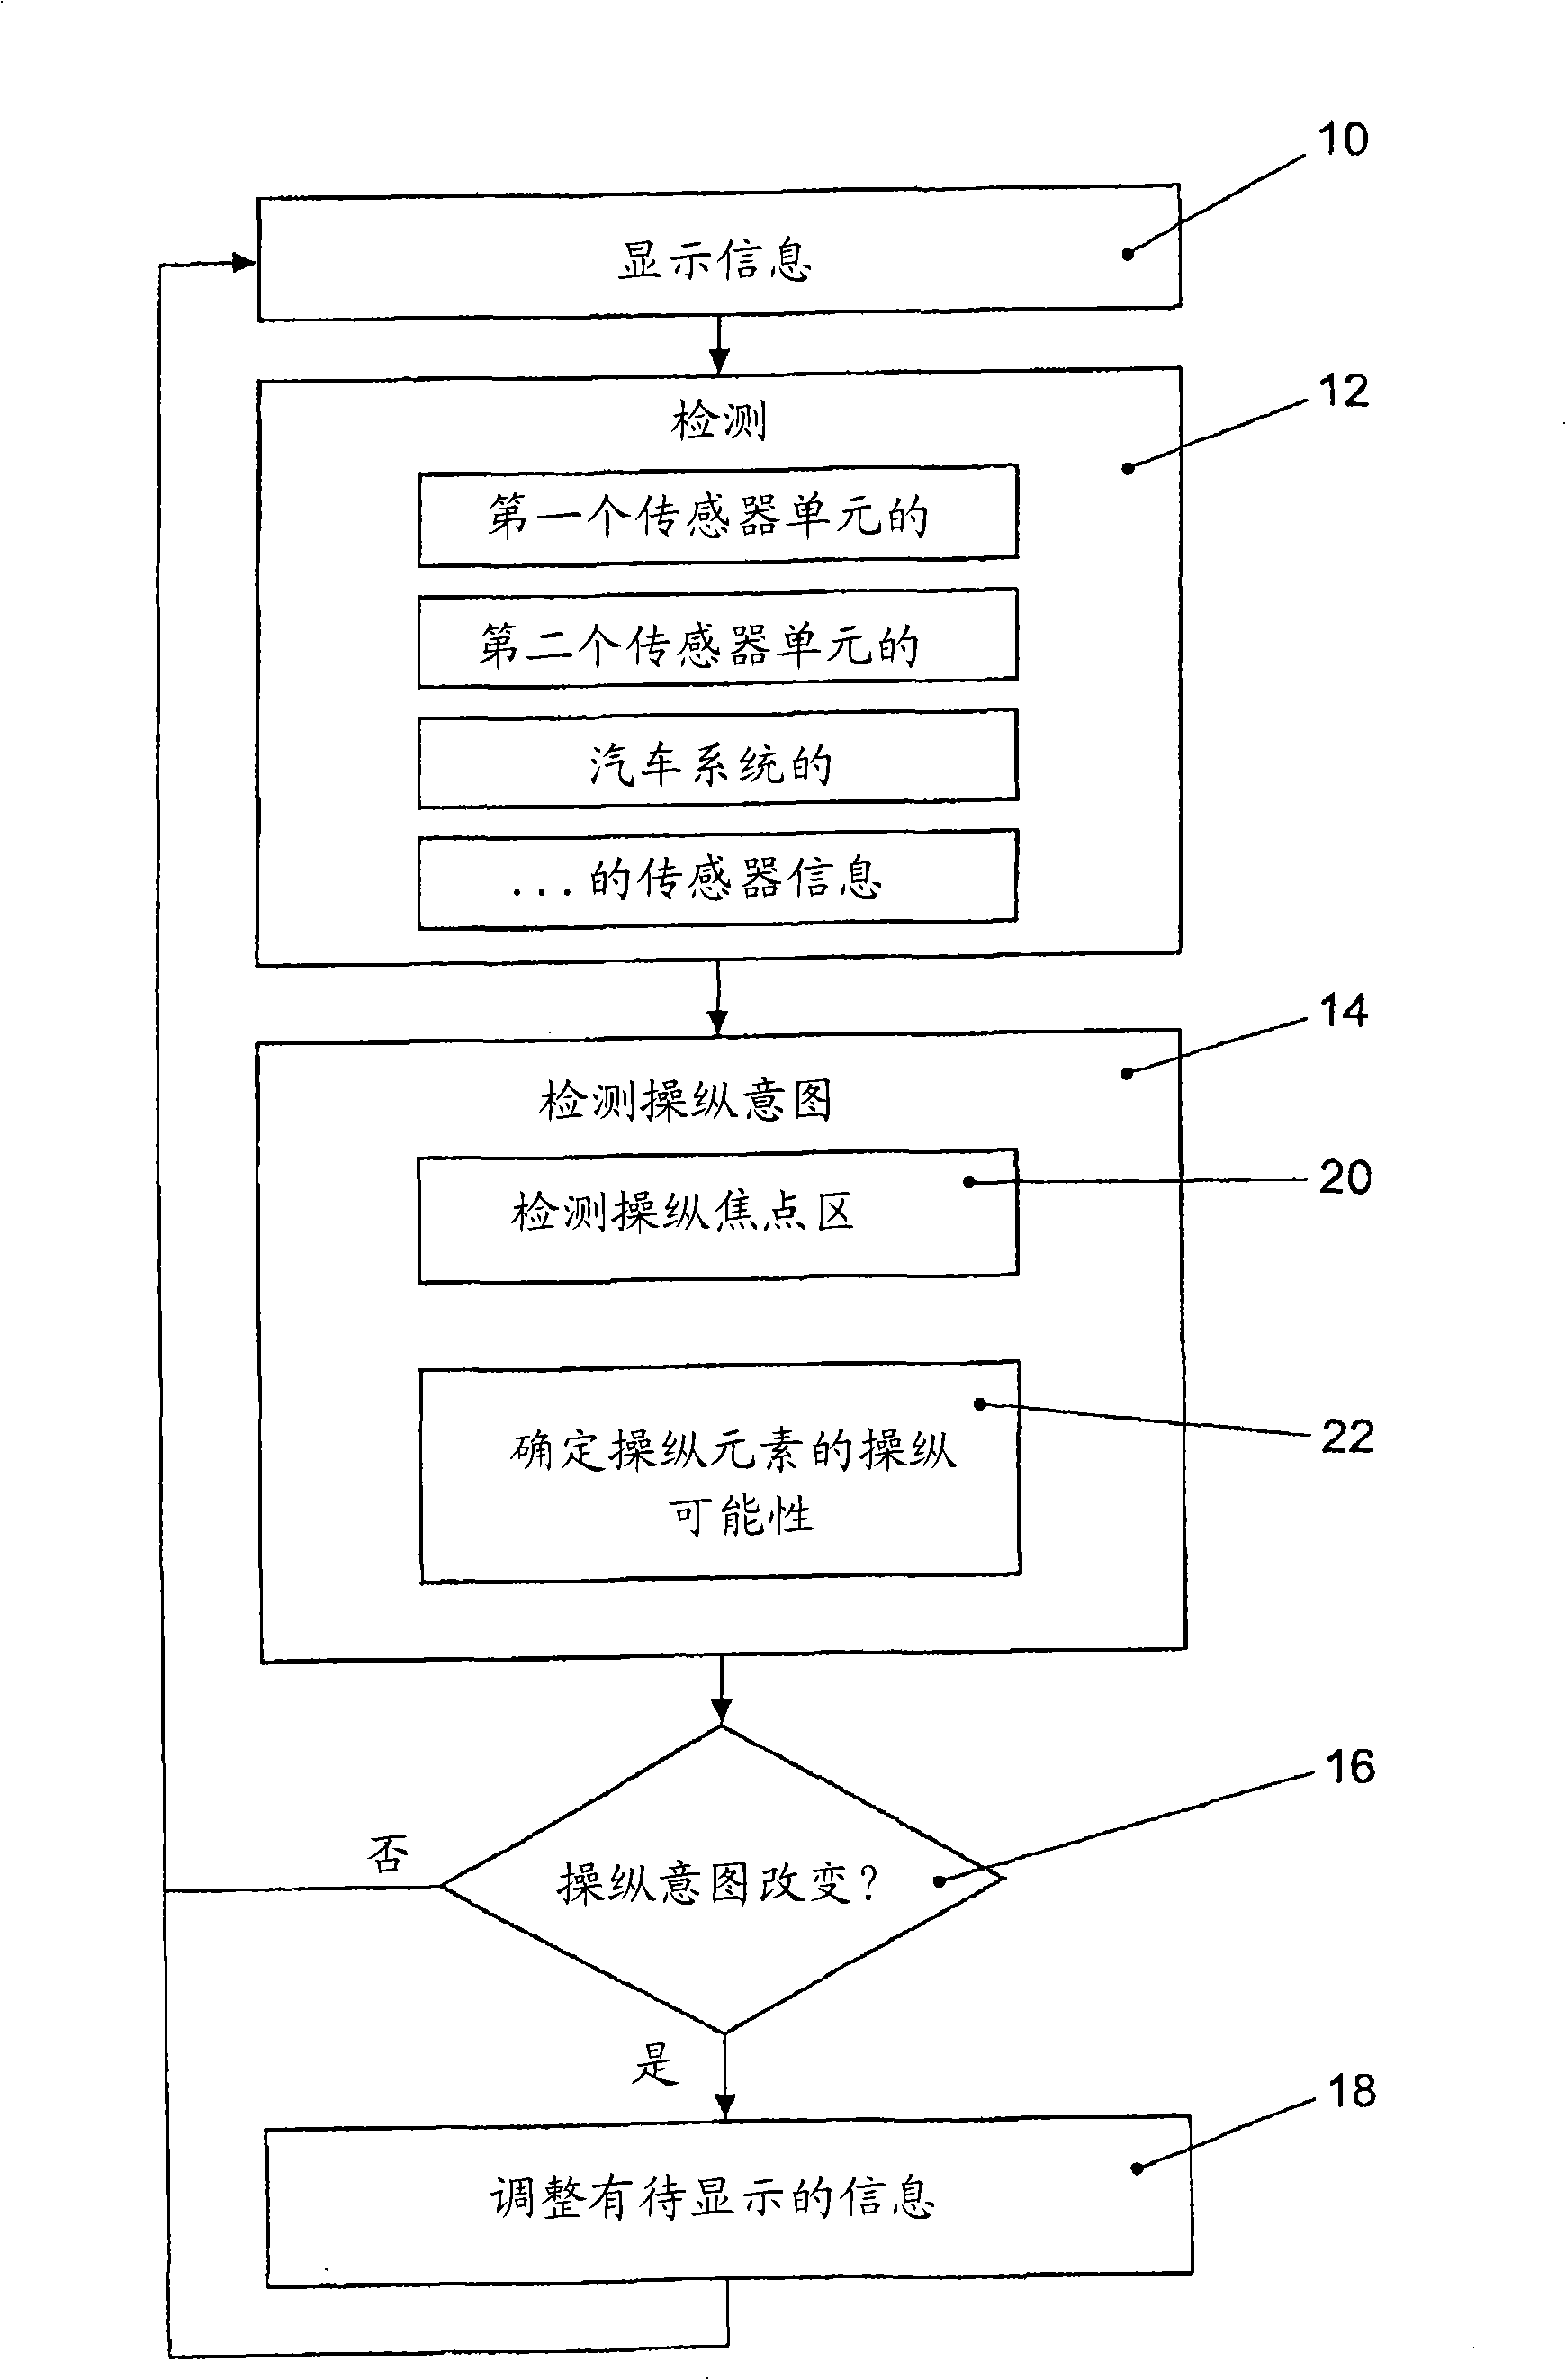 Interactive operating device and method for operating the interactive operating device